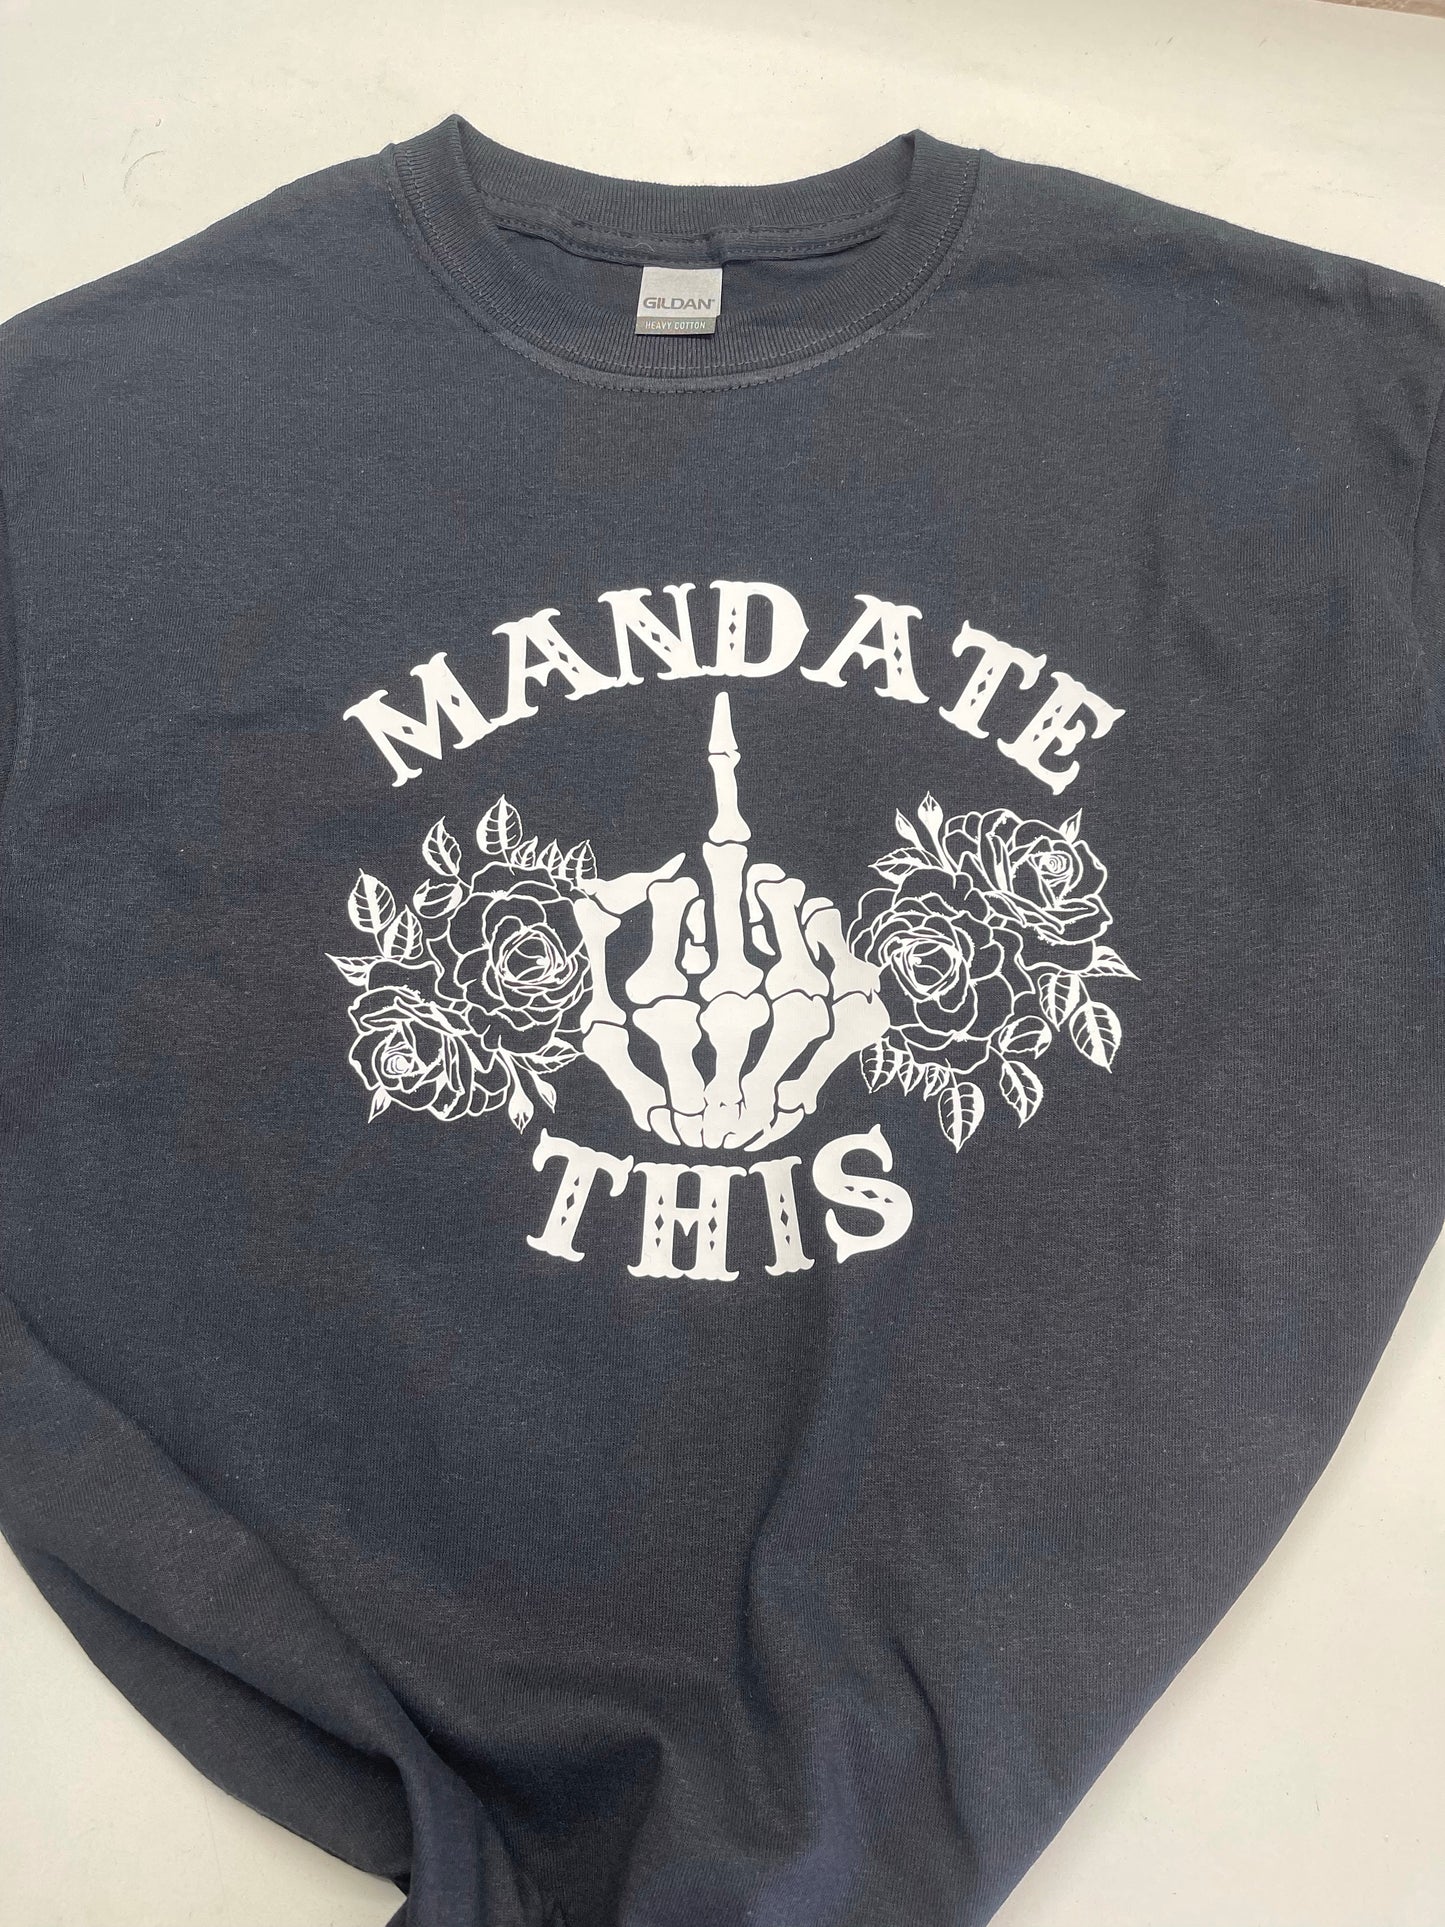 Mandate this middle finger t shirt